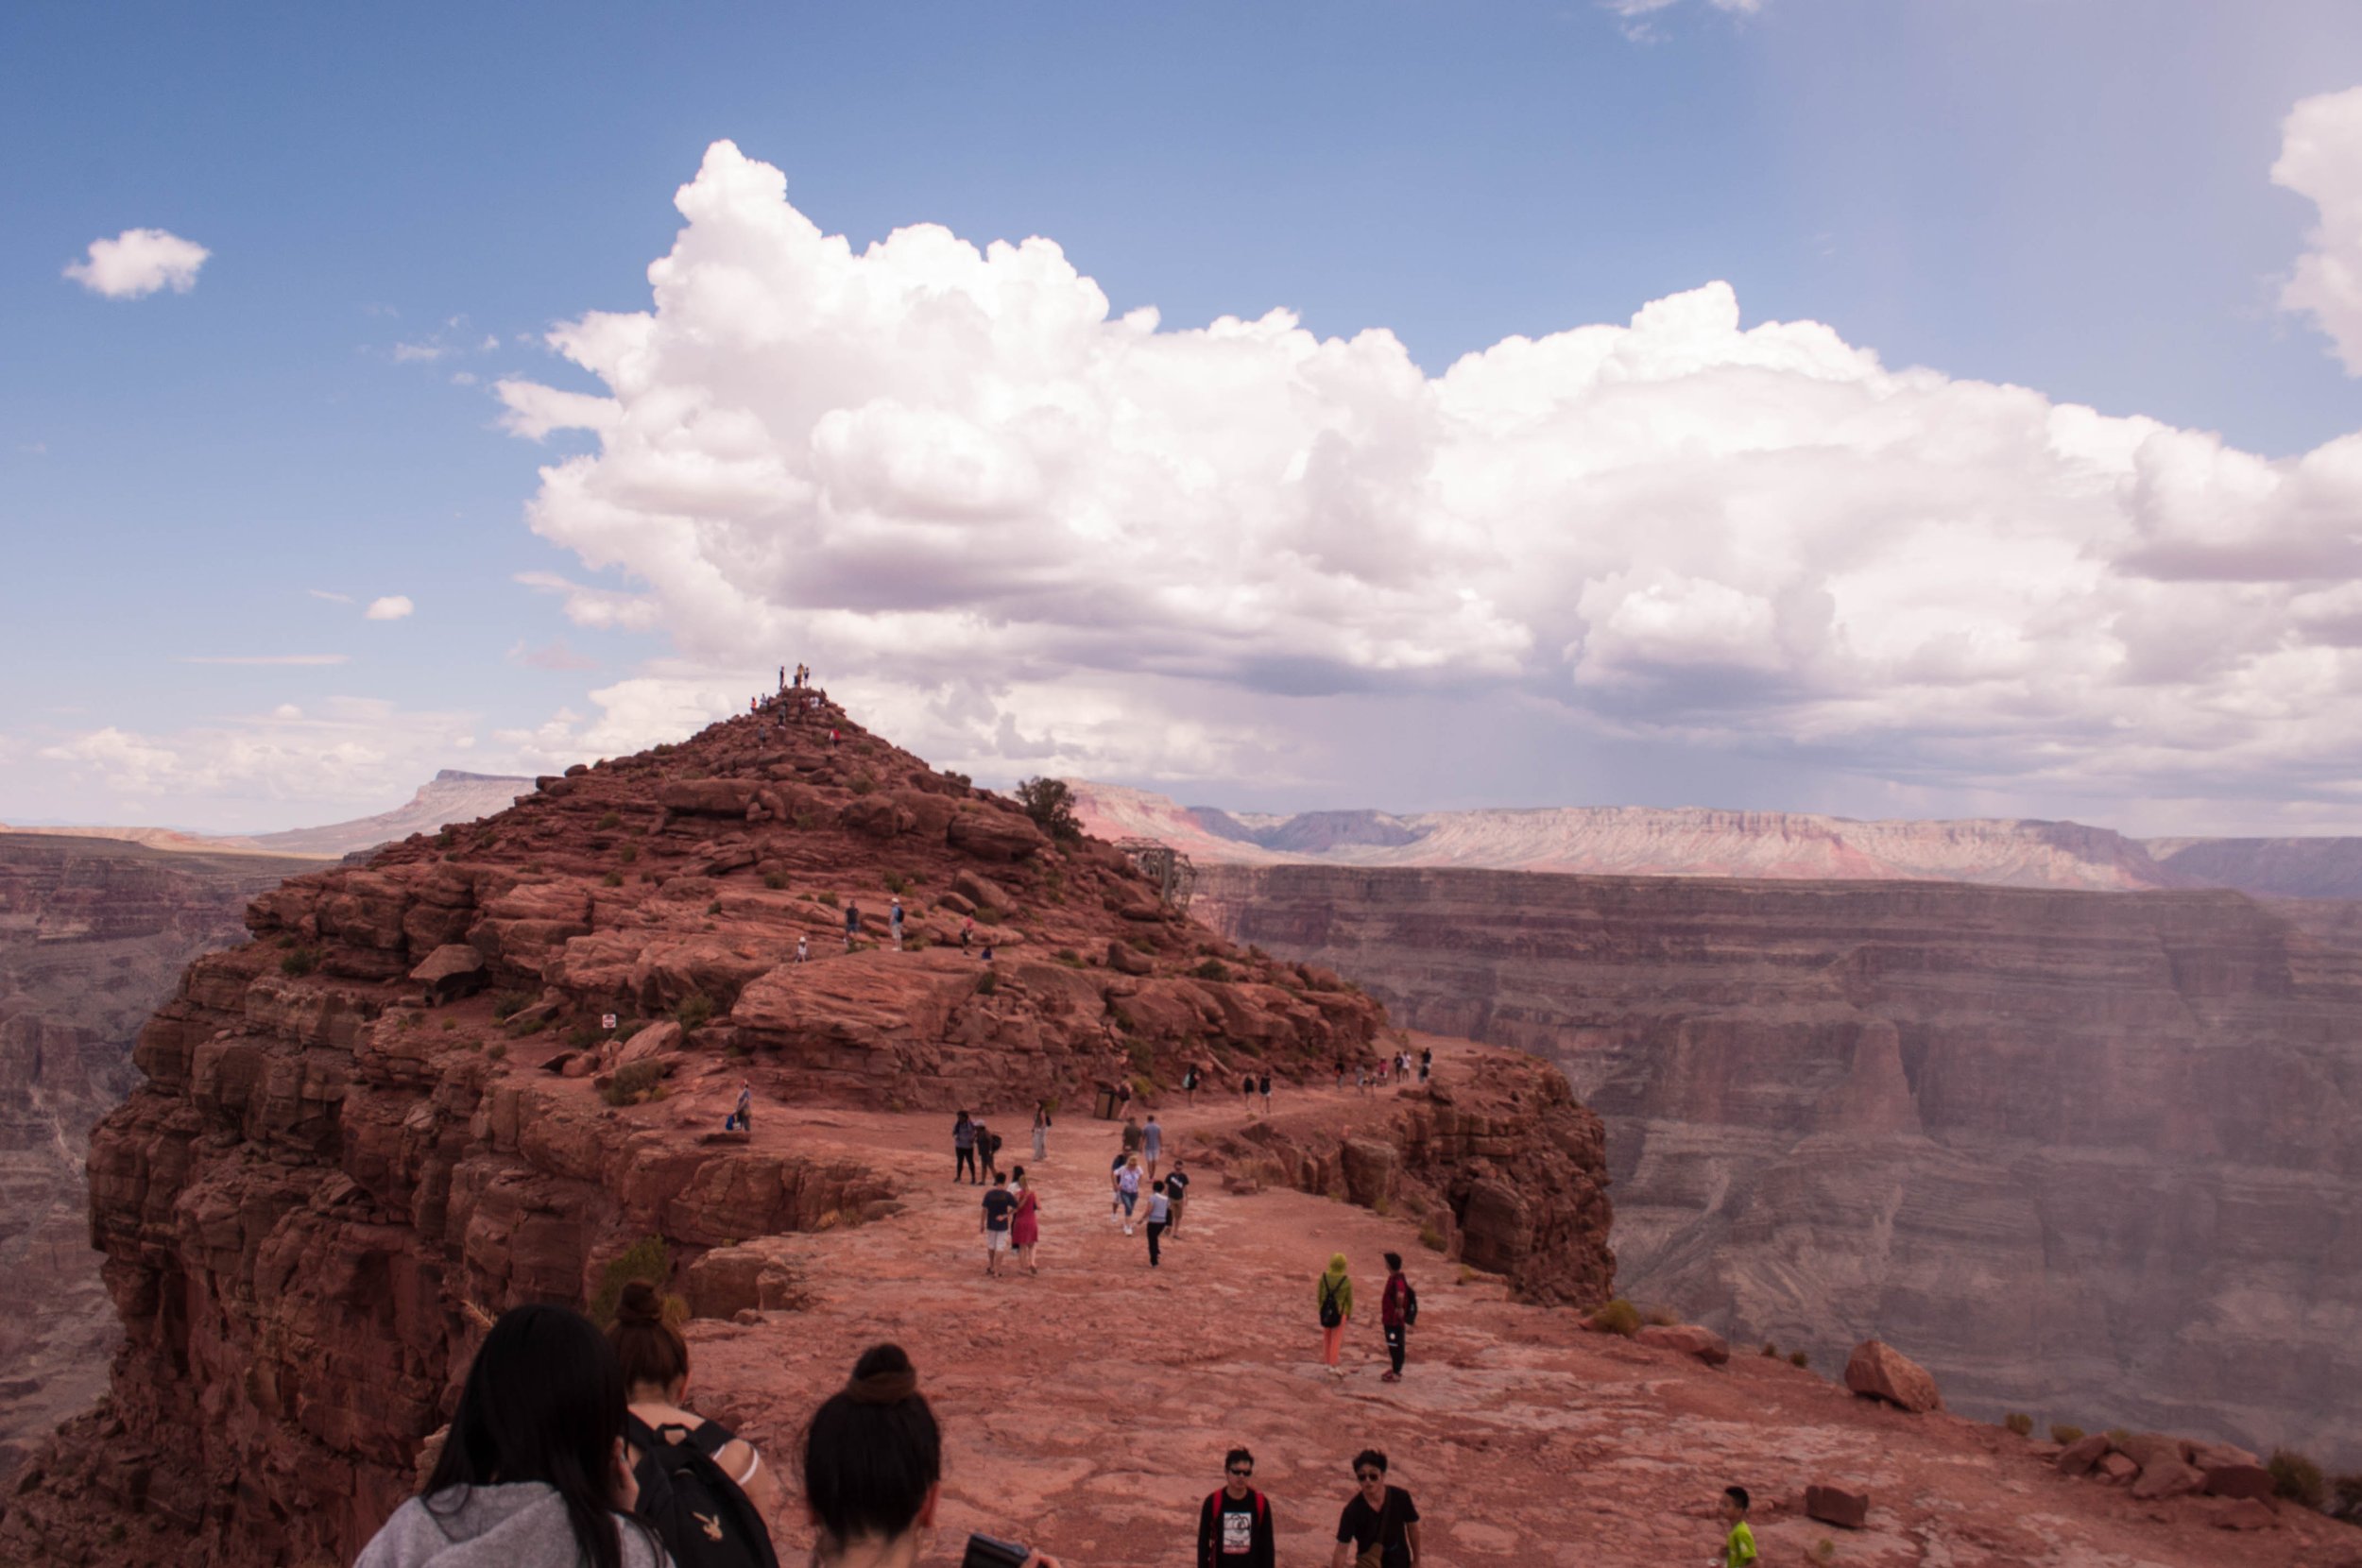 Bachelorette party ideas - go to the grand canyon